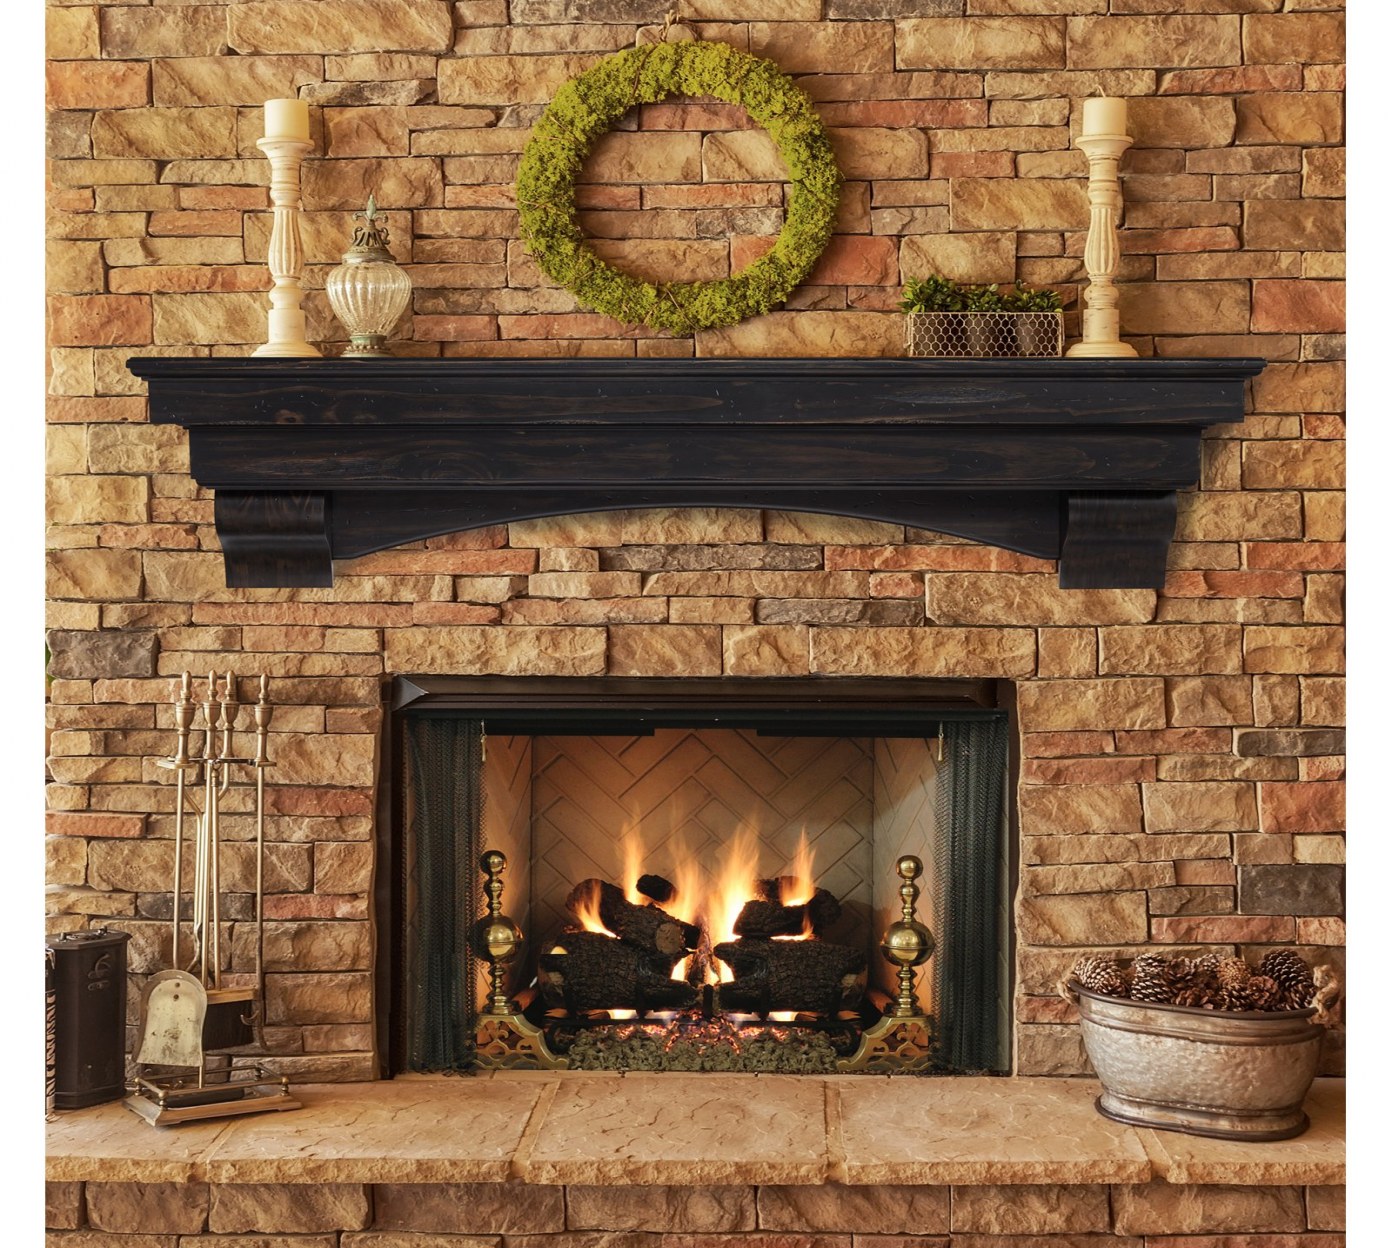 Simple Fireplace Ideas Awesome Fireplace Mantel Shelf Relatively Fireplace Surround with